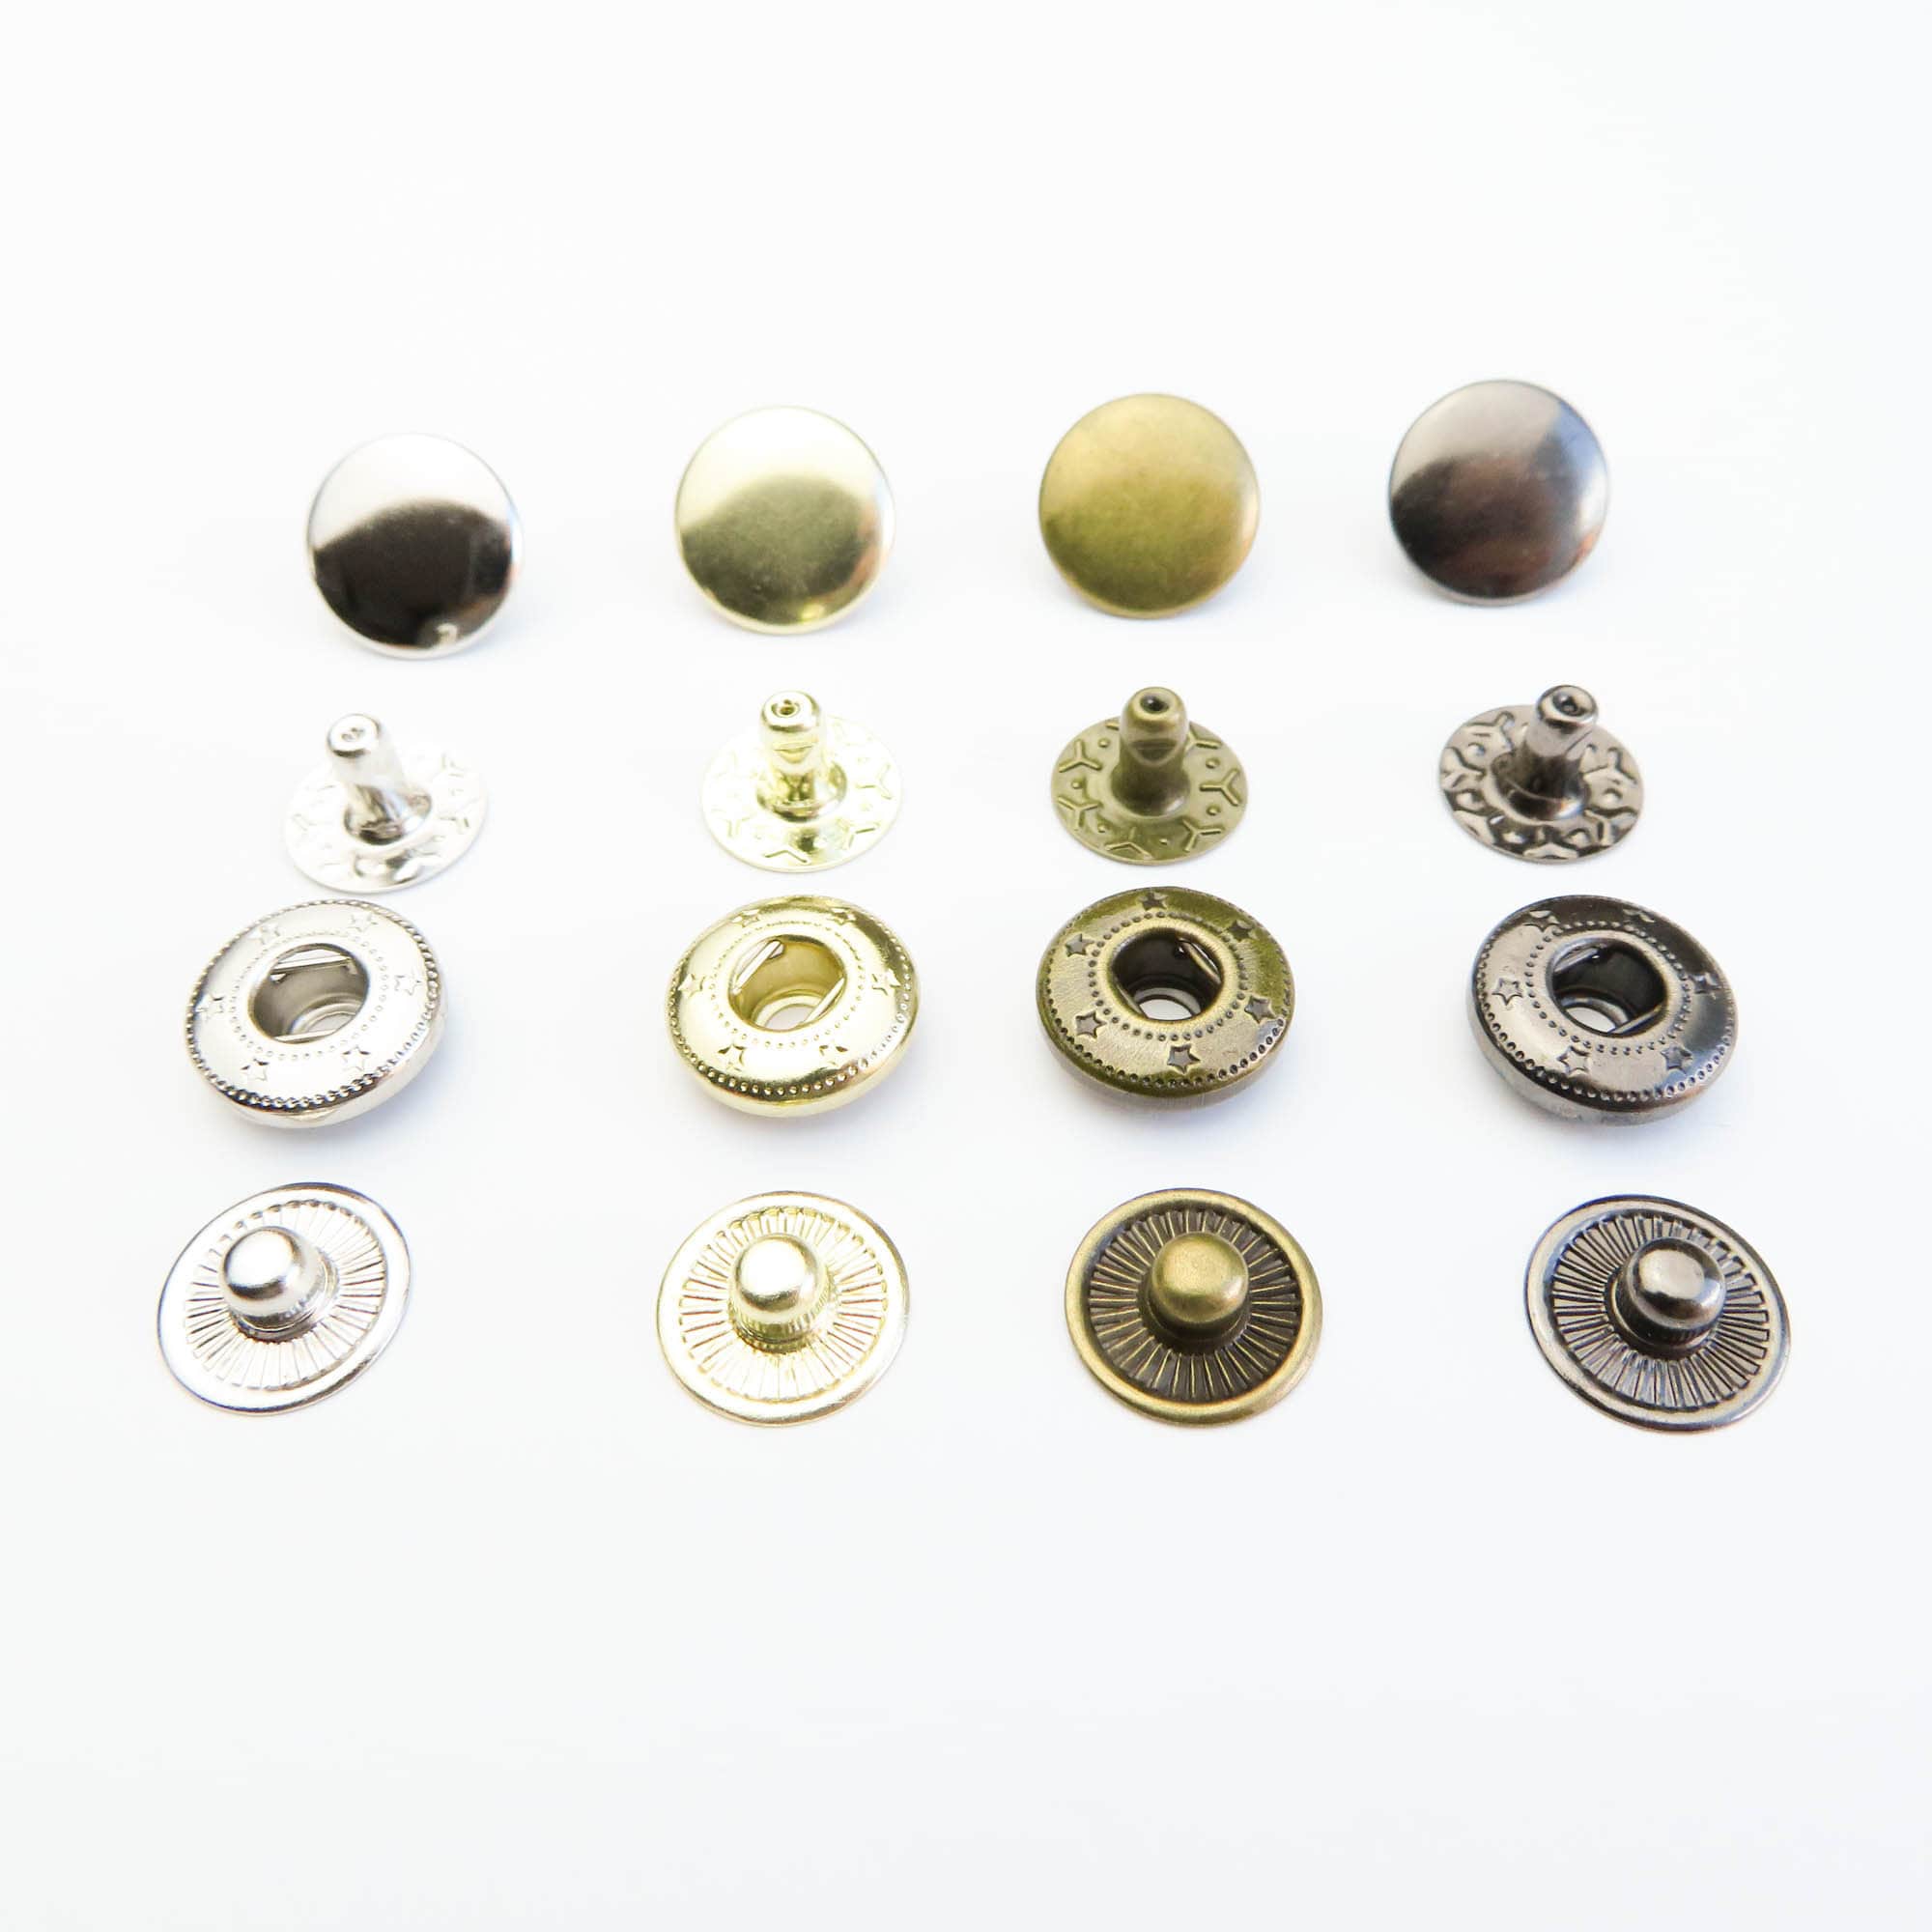 30sets Brass Material Snap Fastener Press Studs Snaps Button